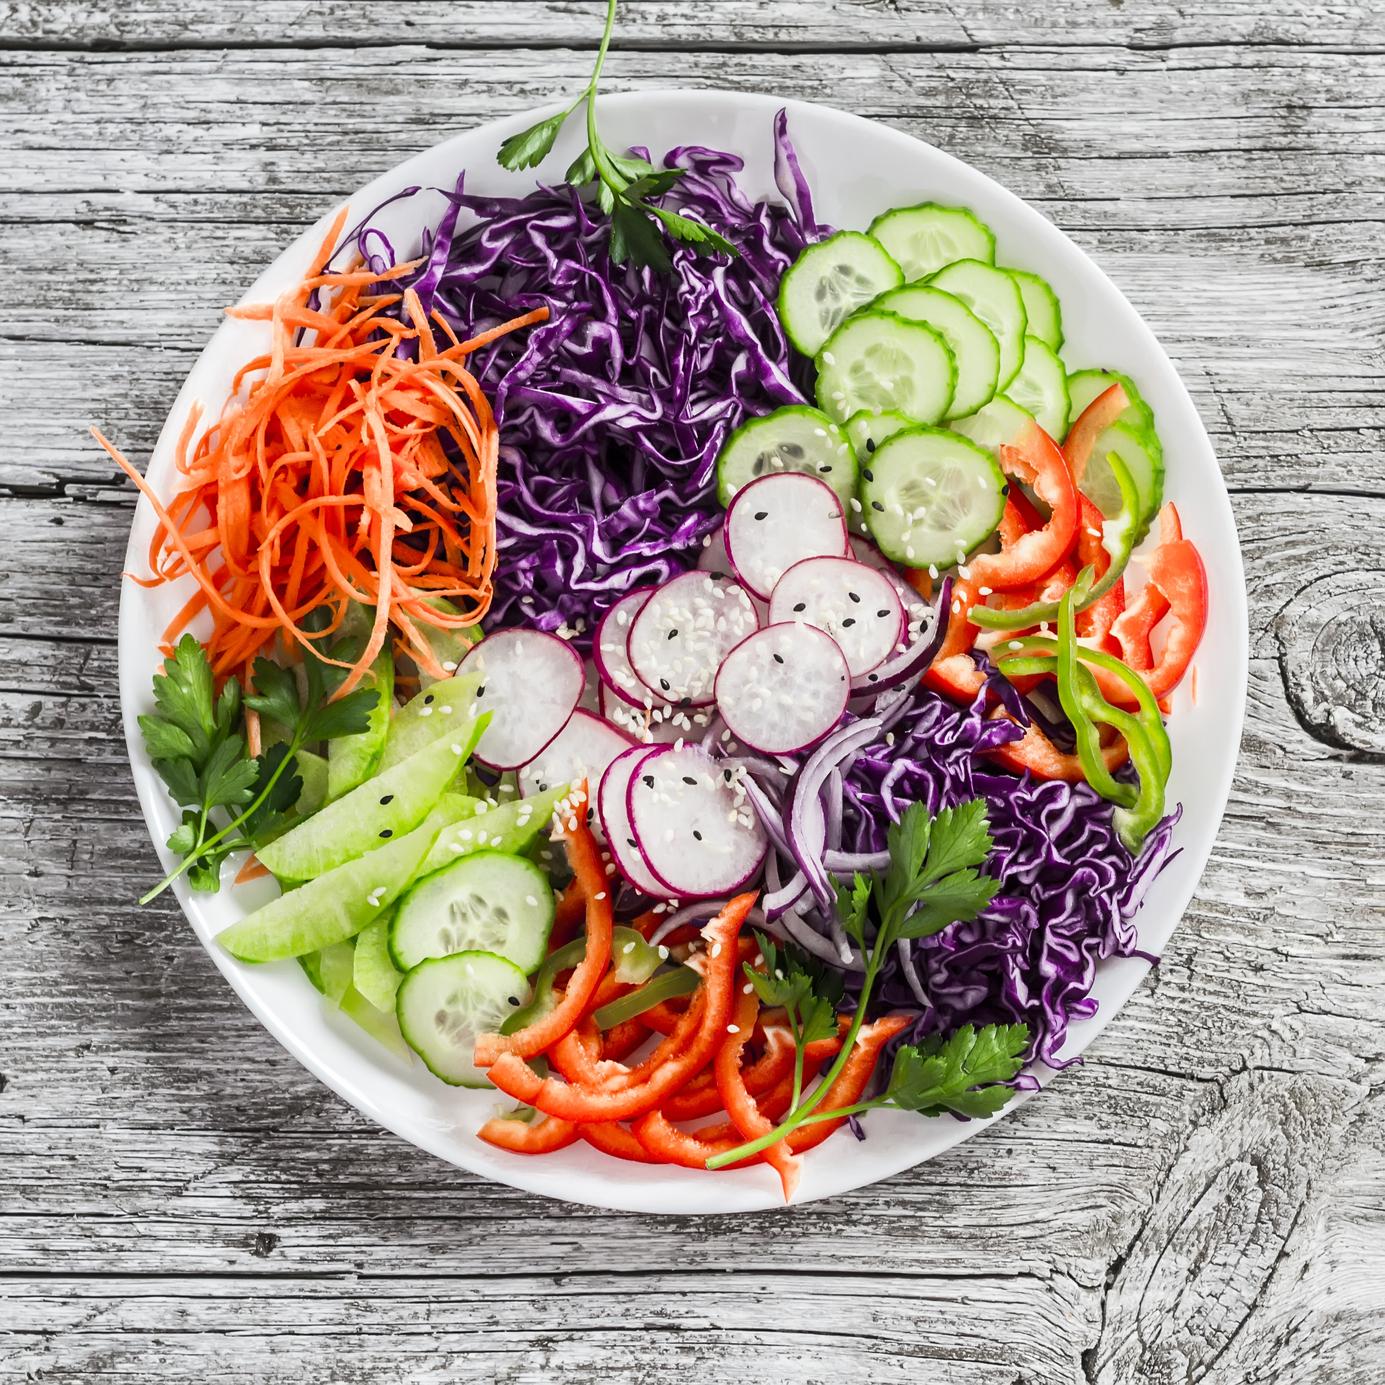 vegetable salad with red cabbage, cucumber, radish, carrots, sweet peppers